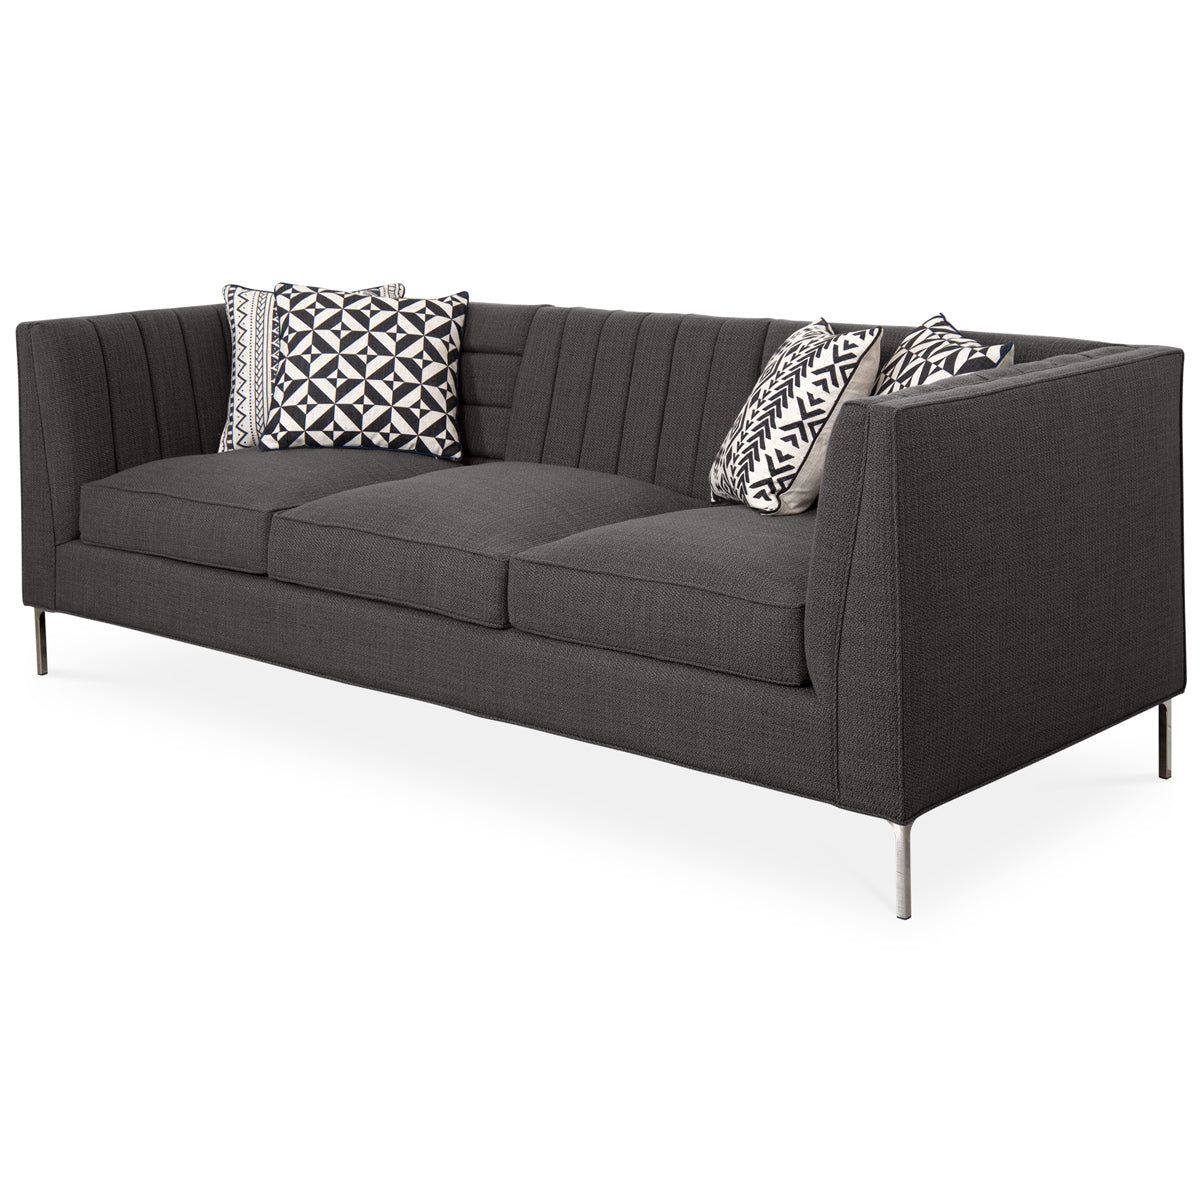 Capri Sofa In Charcoal Linen – Modshop With Light Charcoal Linen Sofas (Gallery 7 of 20)